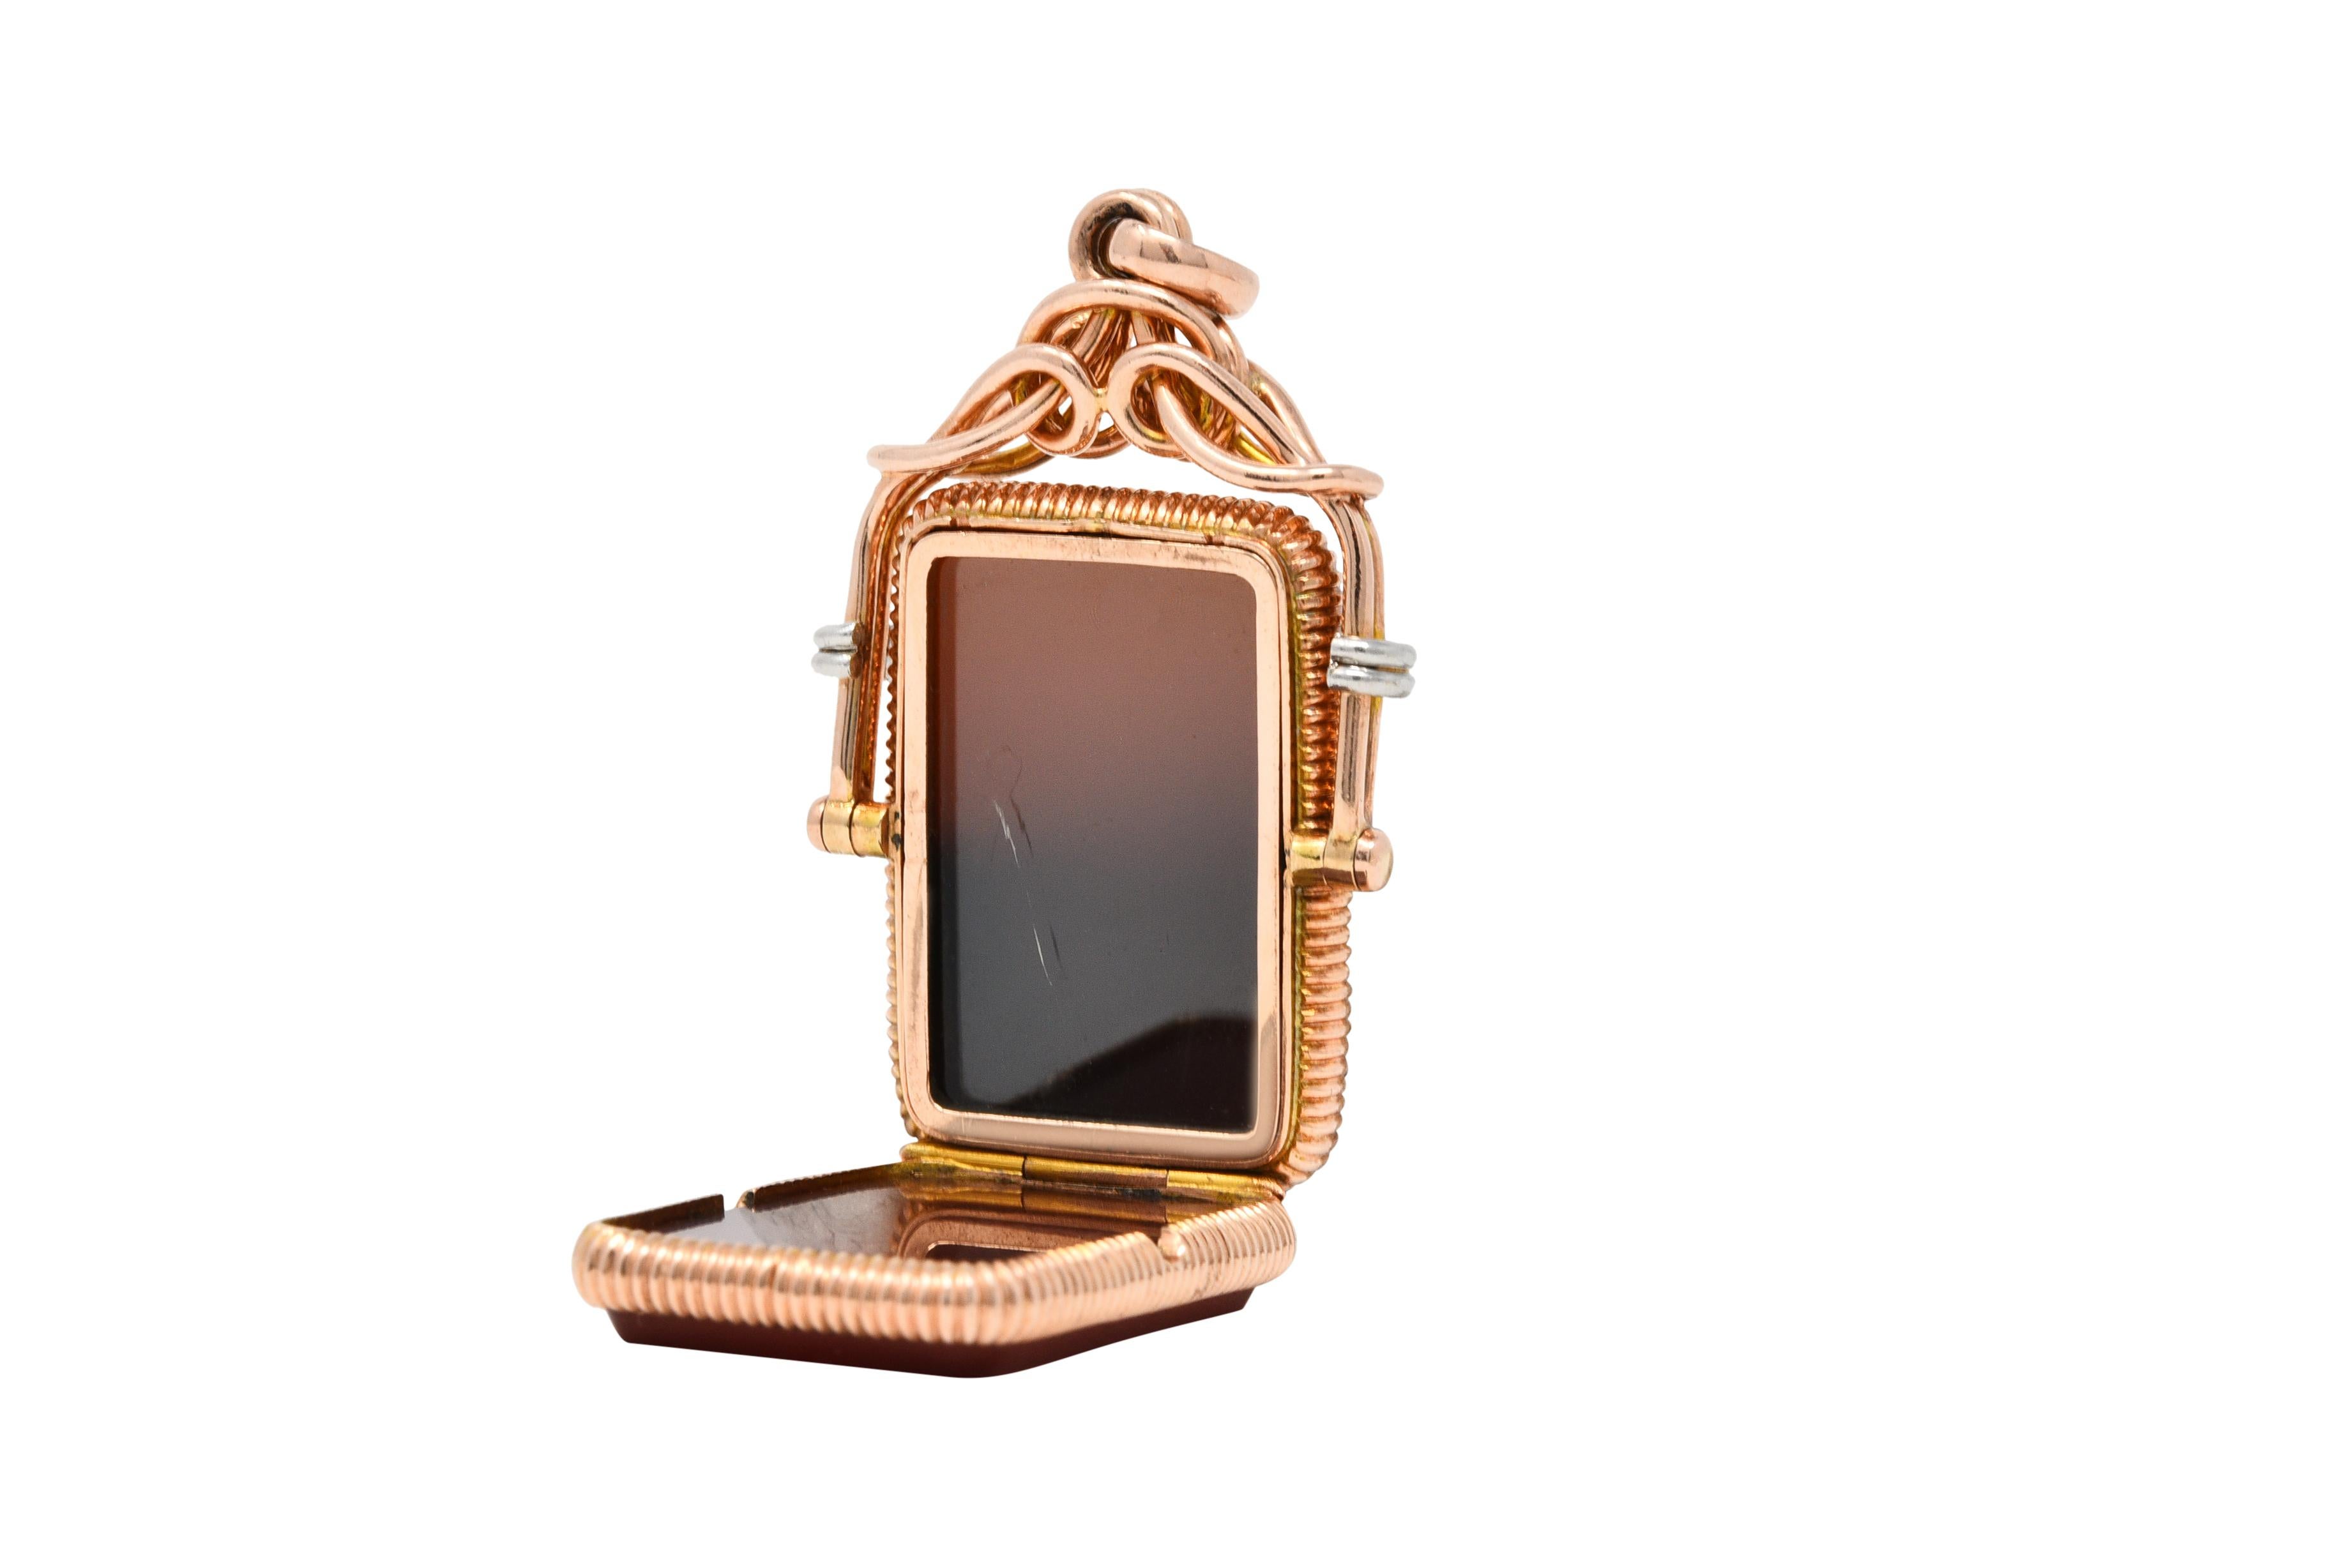 Ribbed rectangular locket features two rectangular chalcedony tablets measuring approximately 24.5 x 17.0 mm

Locket rotates on an axis flipping between a polished tablet of bezel set sard and a carnelian intaglio

Sard is opaque with dark and